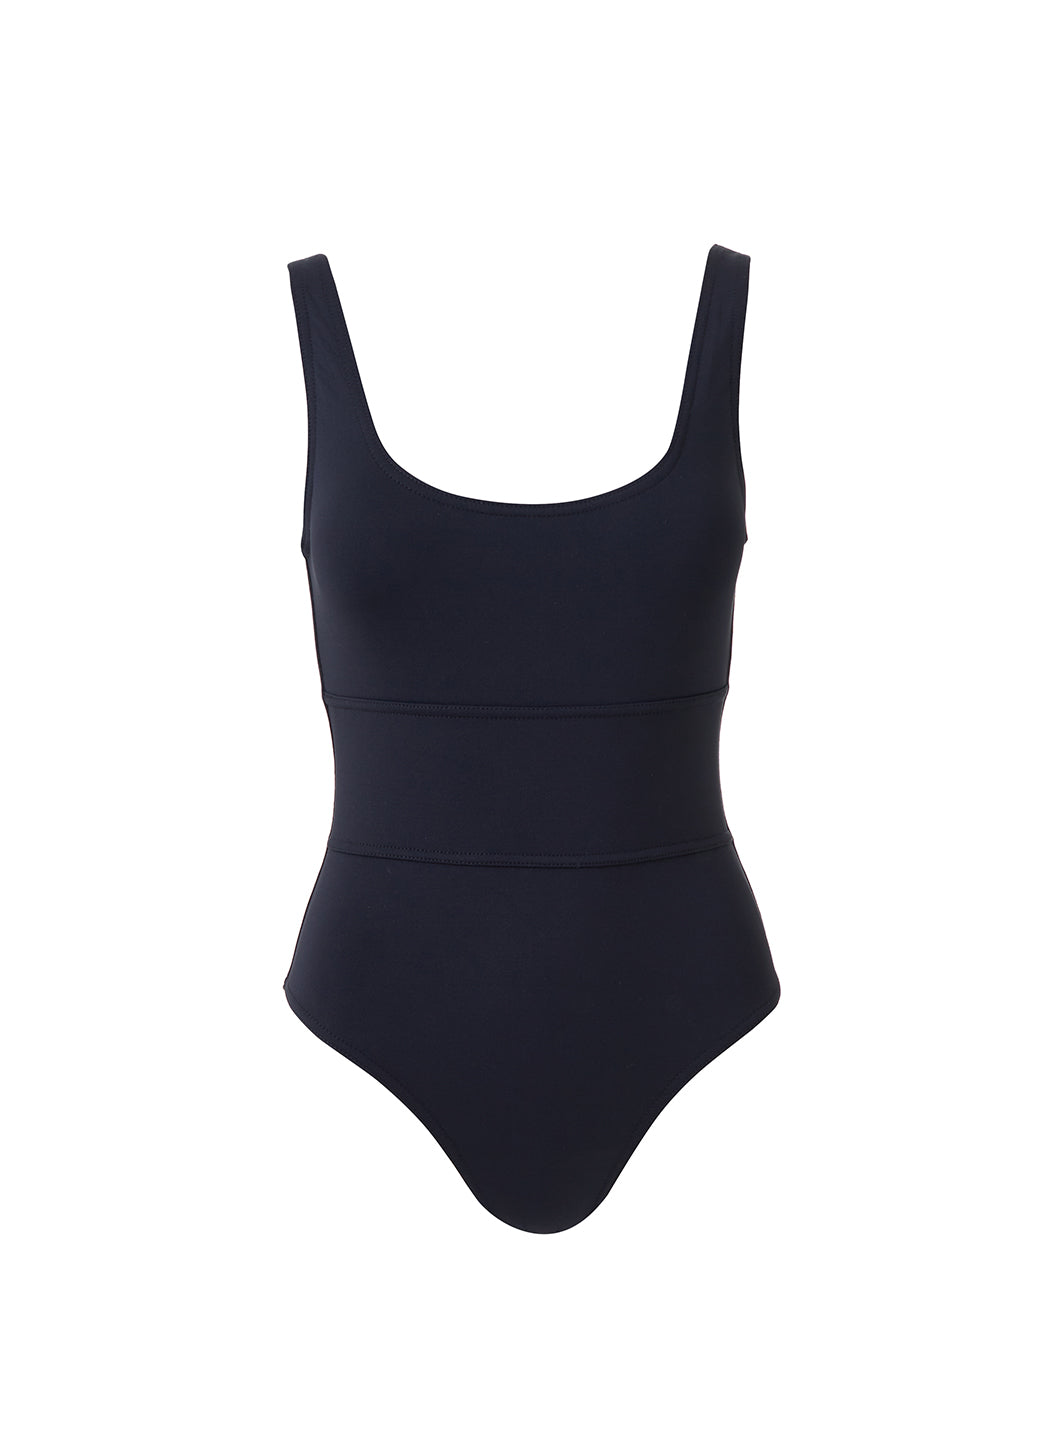 Melissa Odabash One Piece Swimsuits | Official Website & Page 2